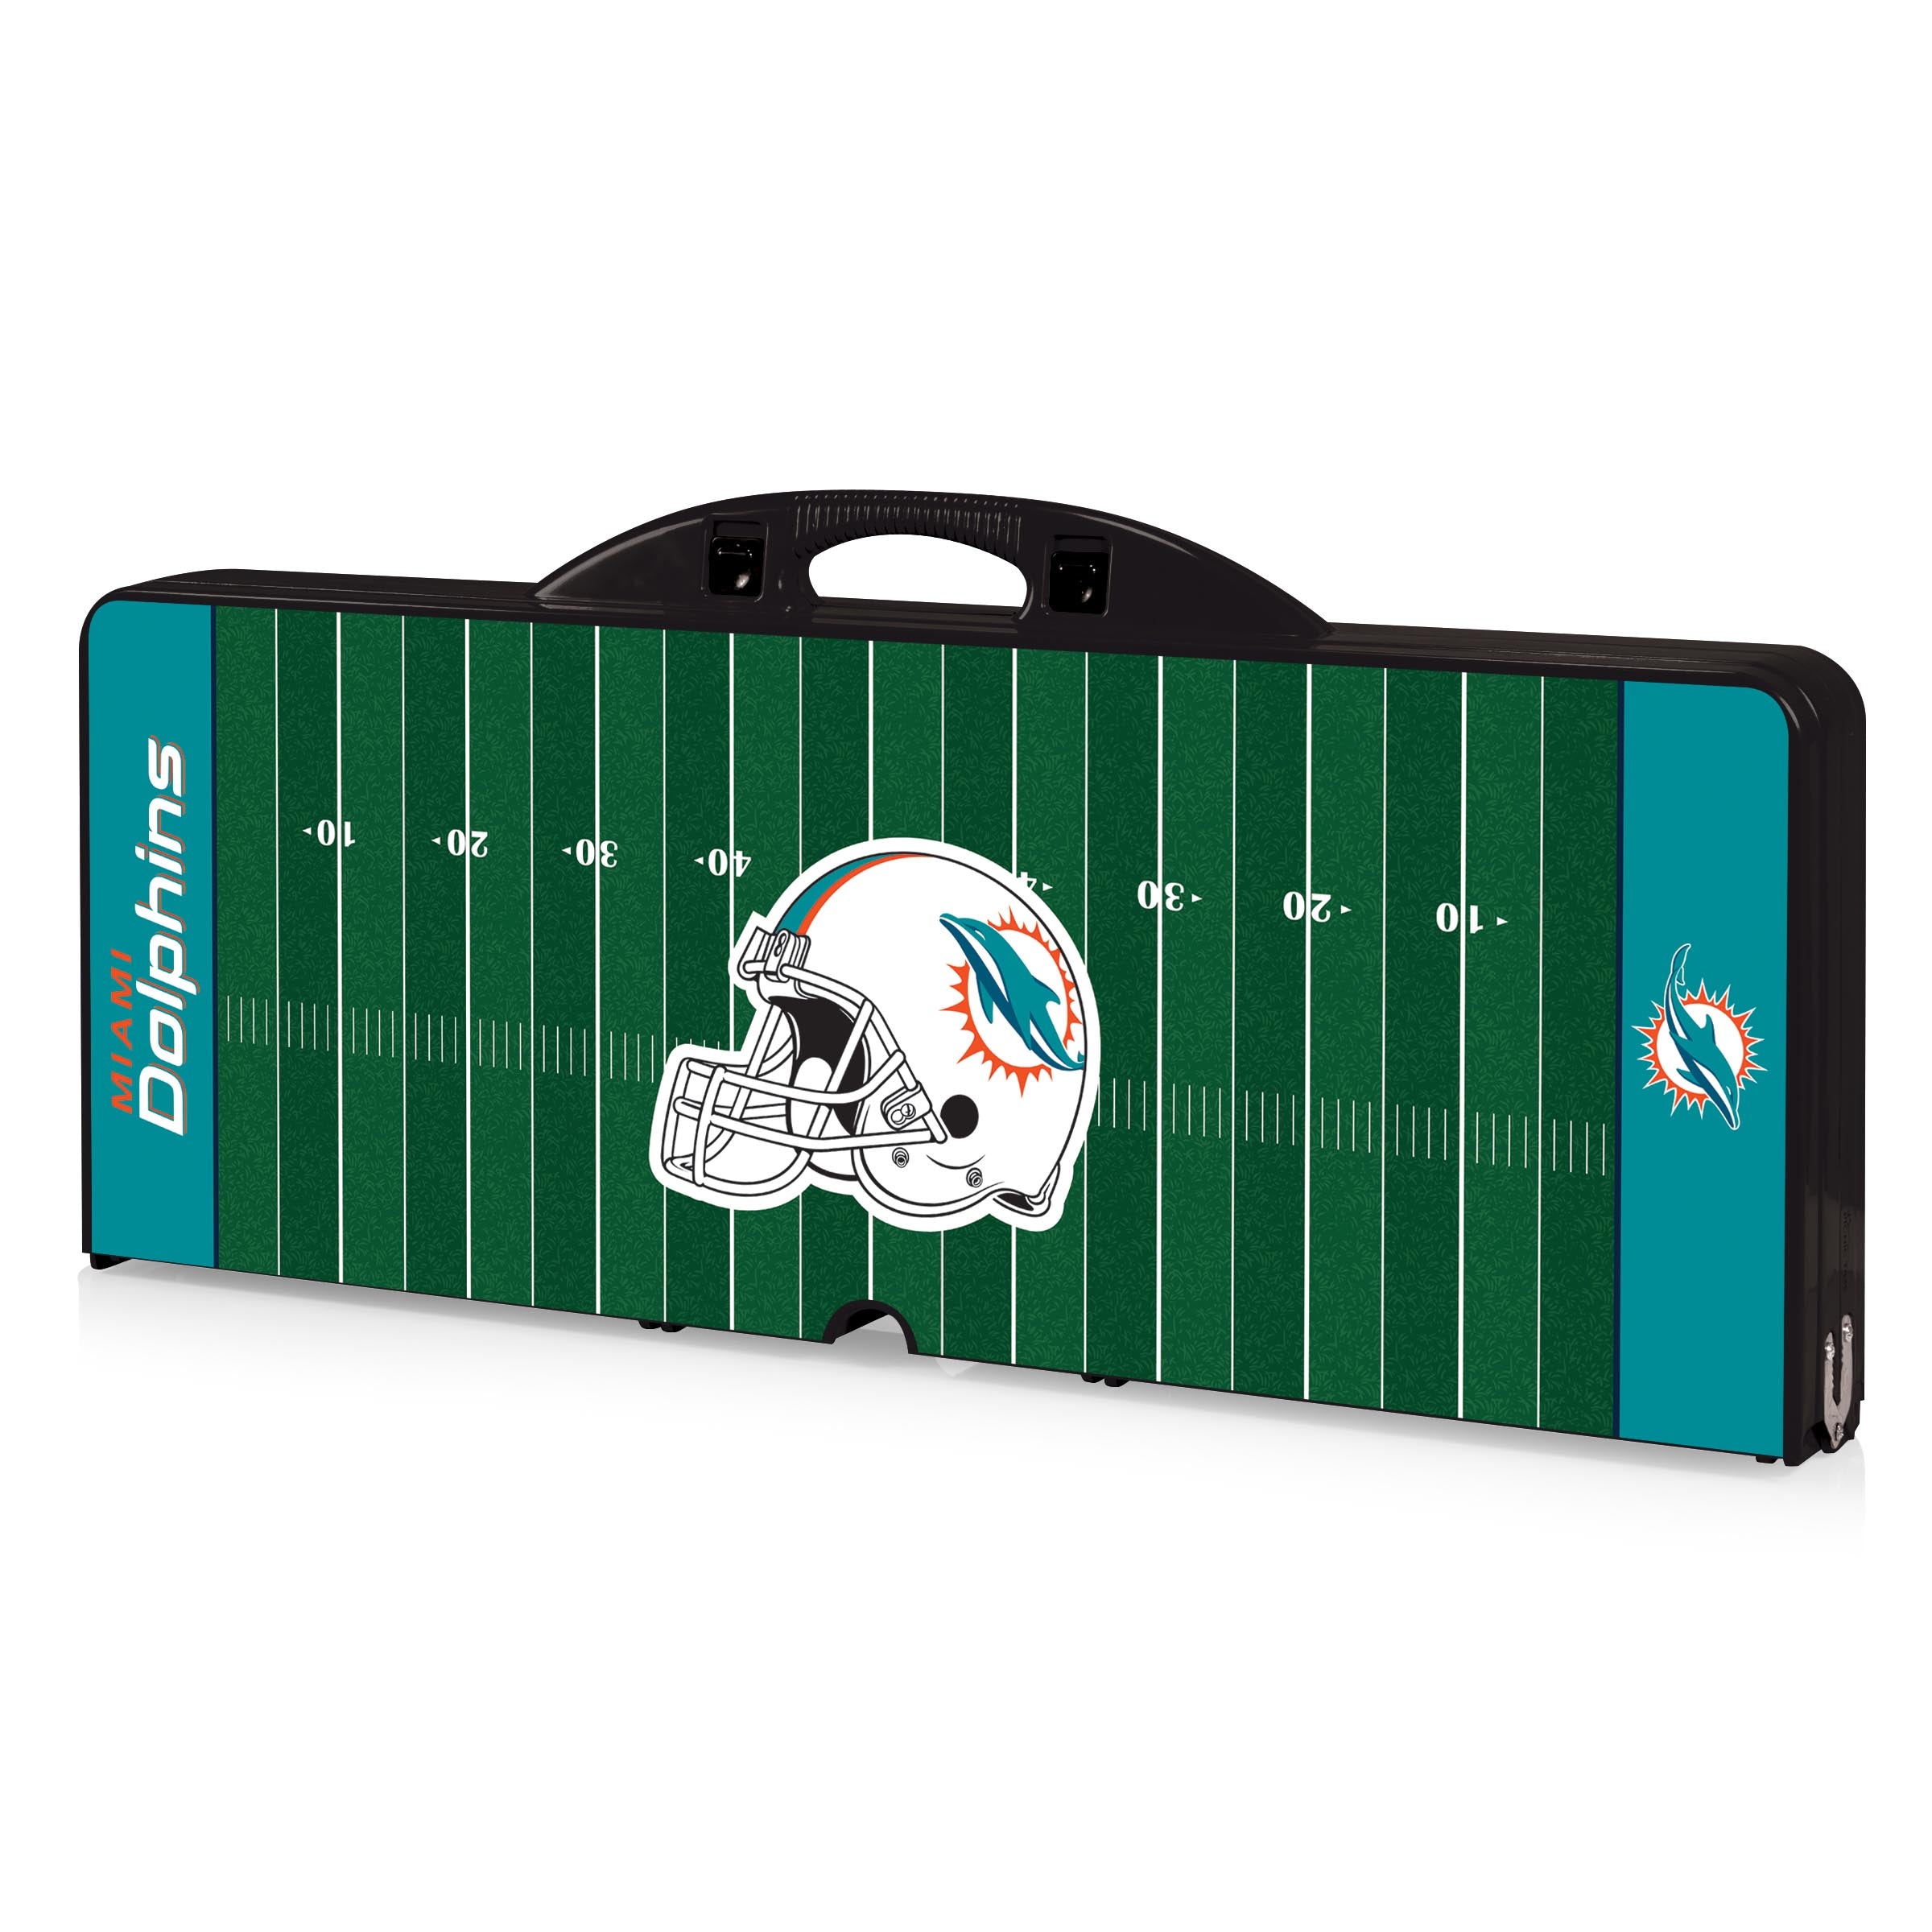 Miami Dolphins Football Field - Picnic Table Portable Folding Table with Seats